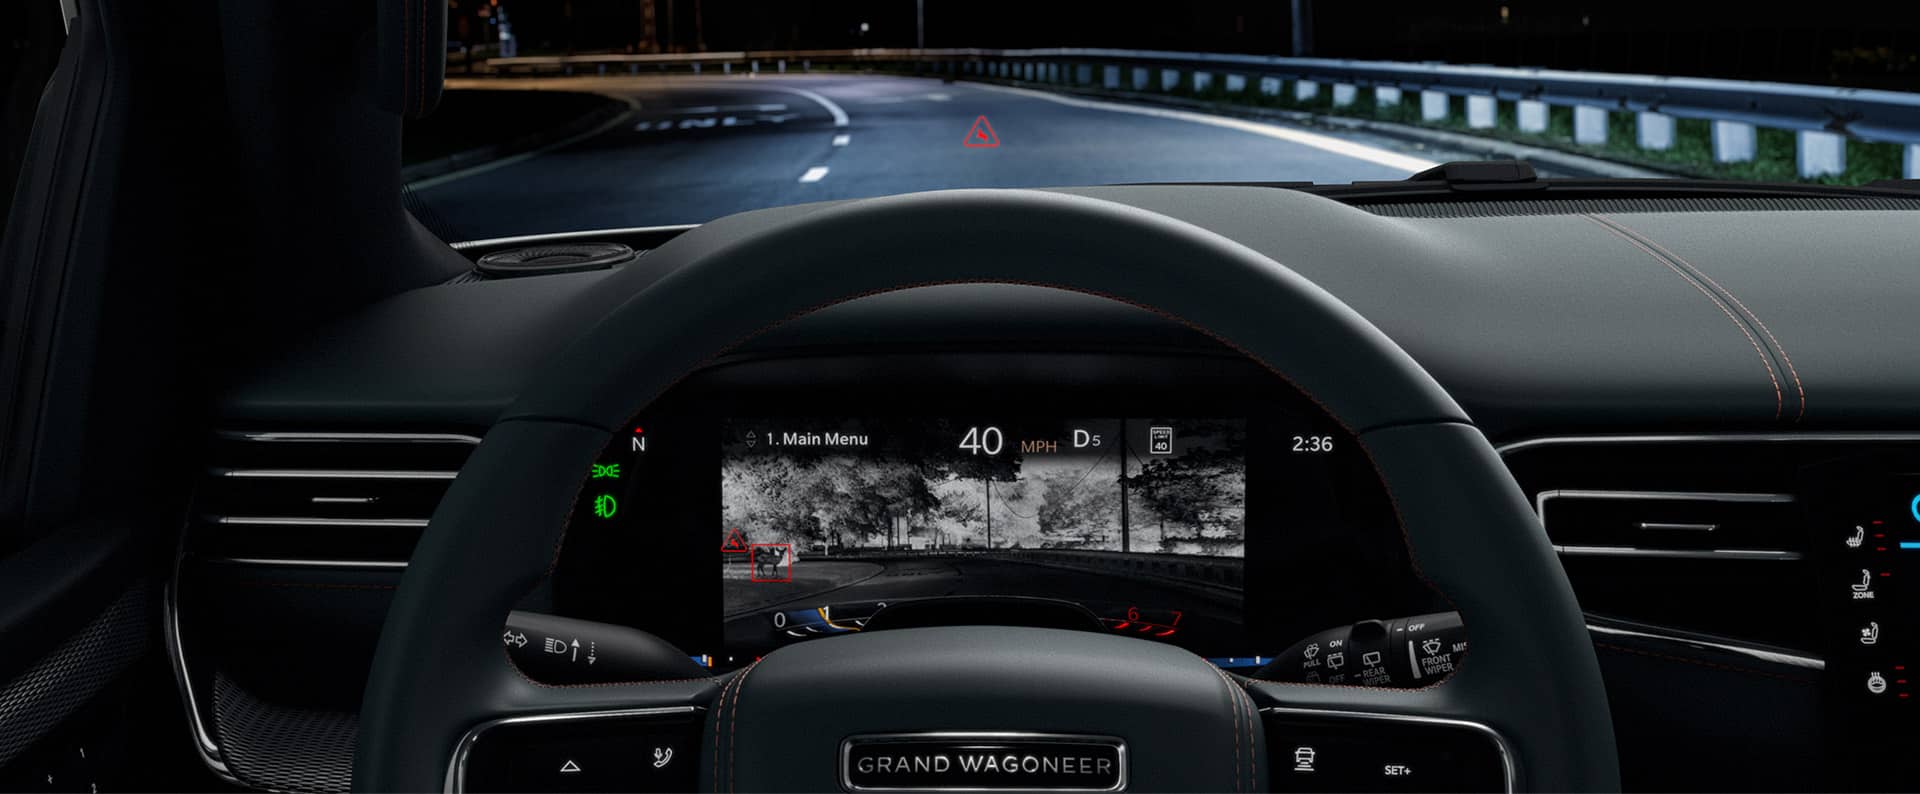 The driver information cluster display in the 2023 Grand Wagoneer Series III, displaying a night vision view of the road ahead with potential obstacles highlighted in red.